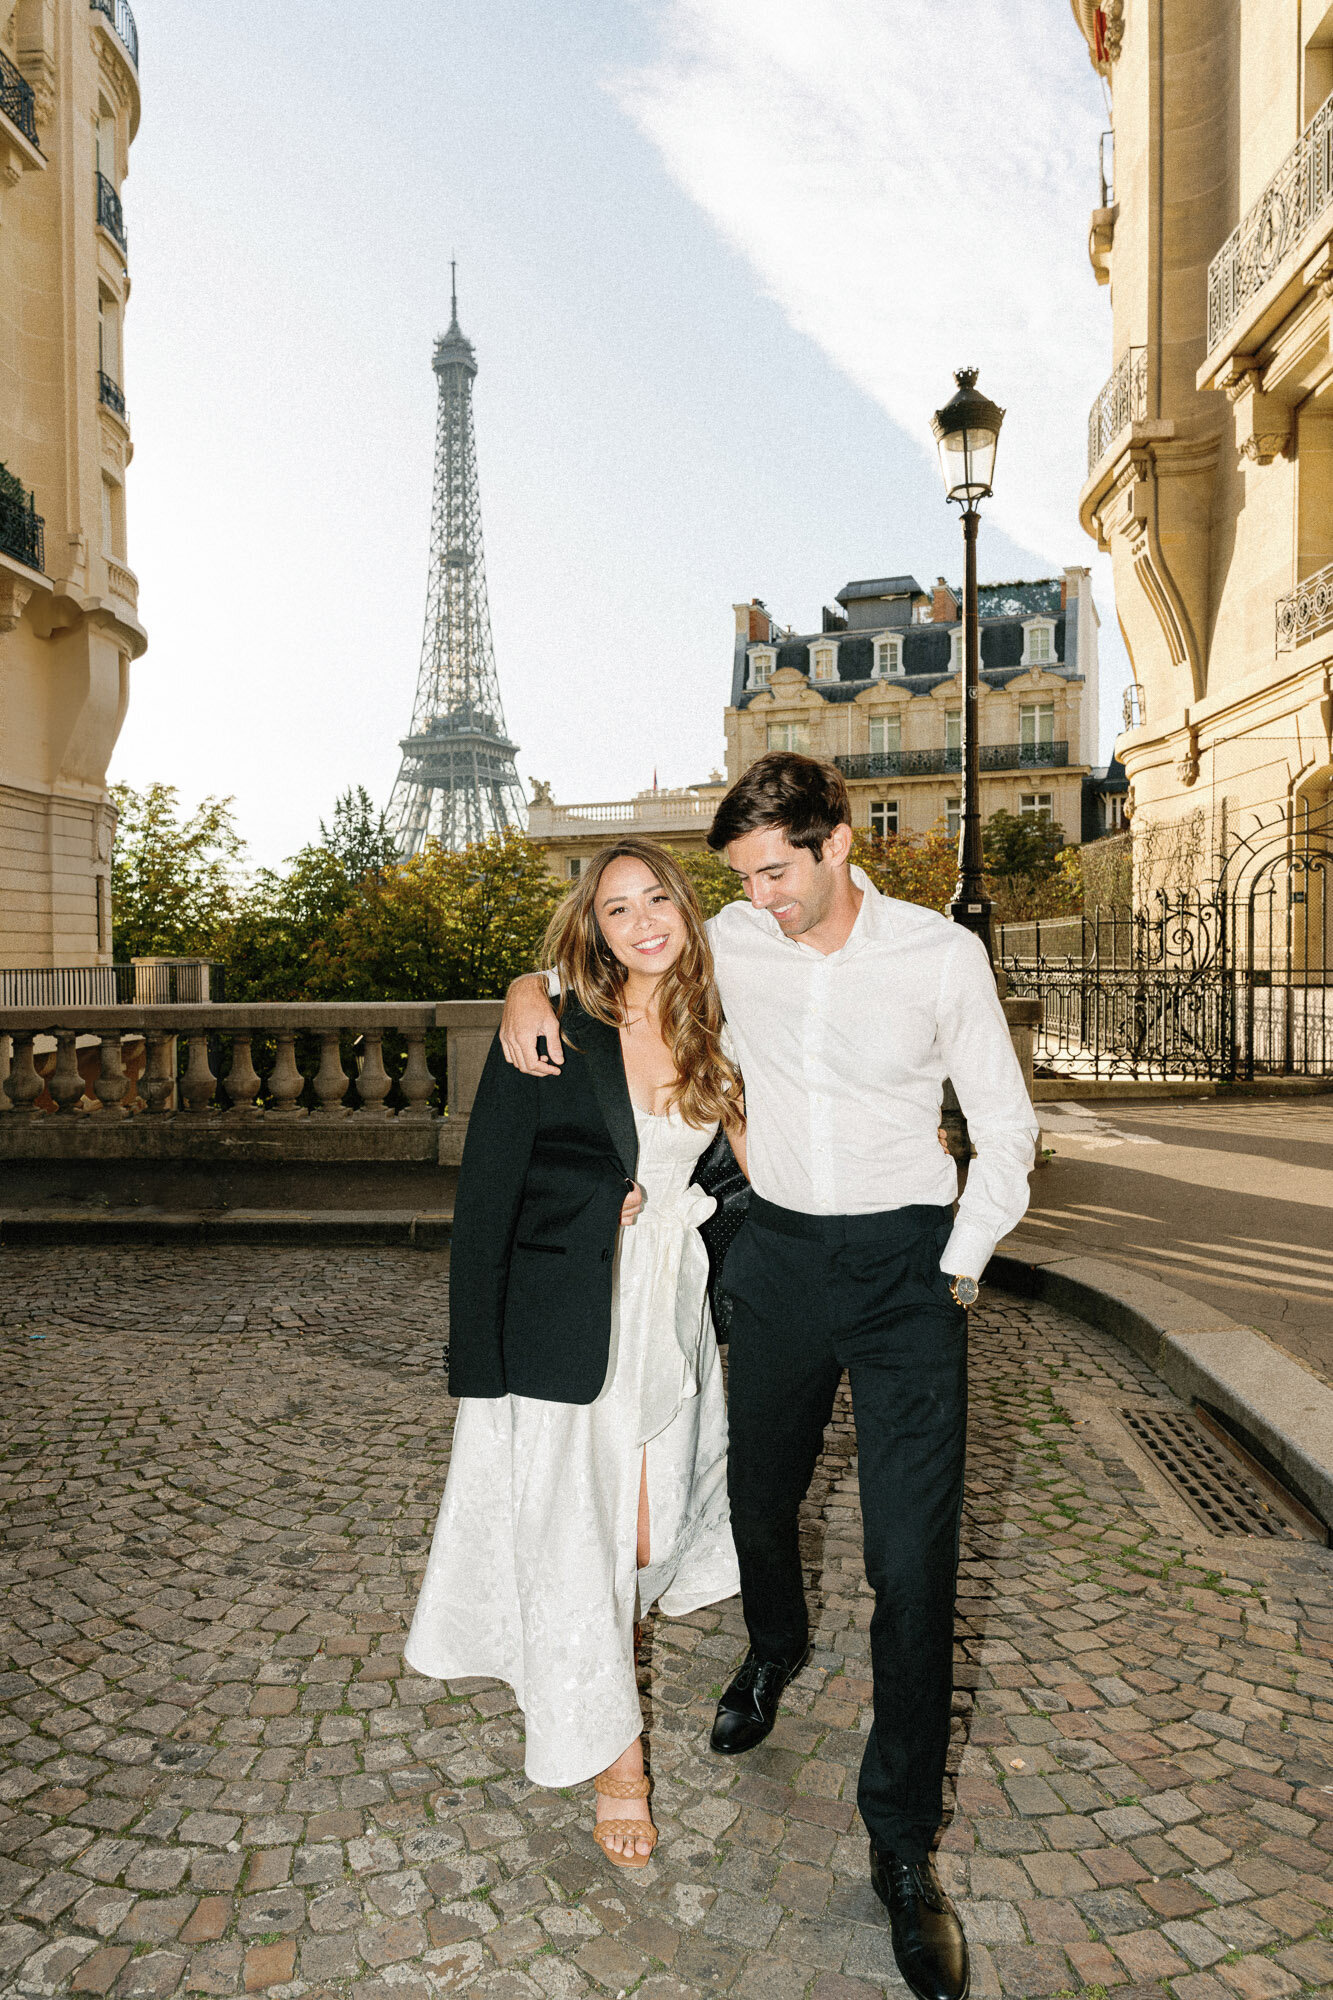 Christine & Kyle Paris Photosession by Tatyana Chaiko photographer in France-84